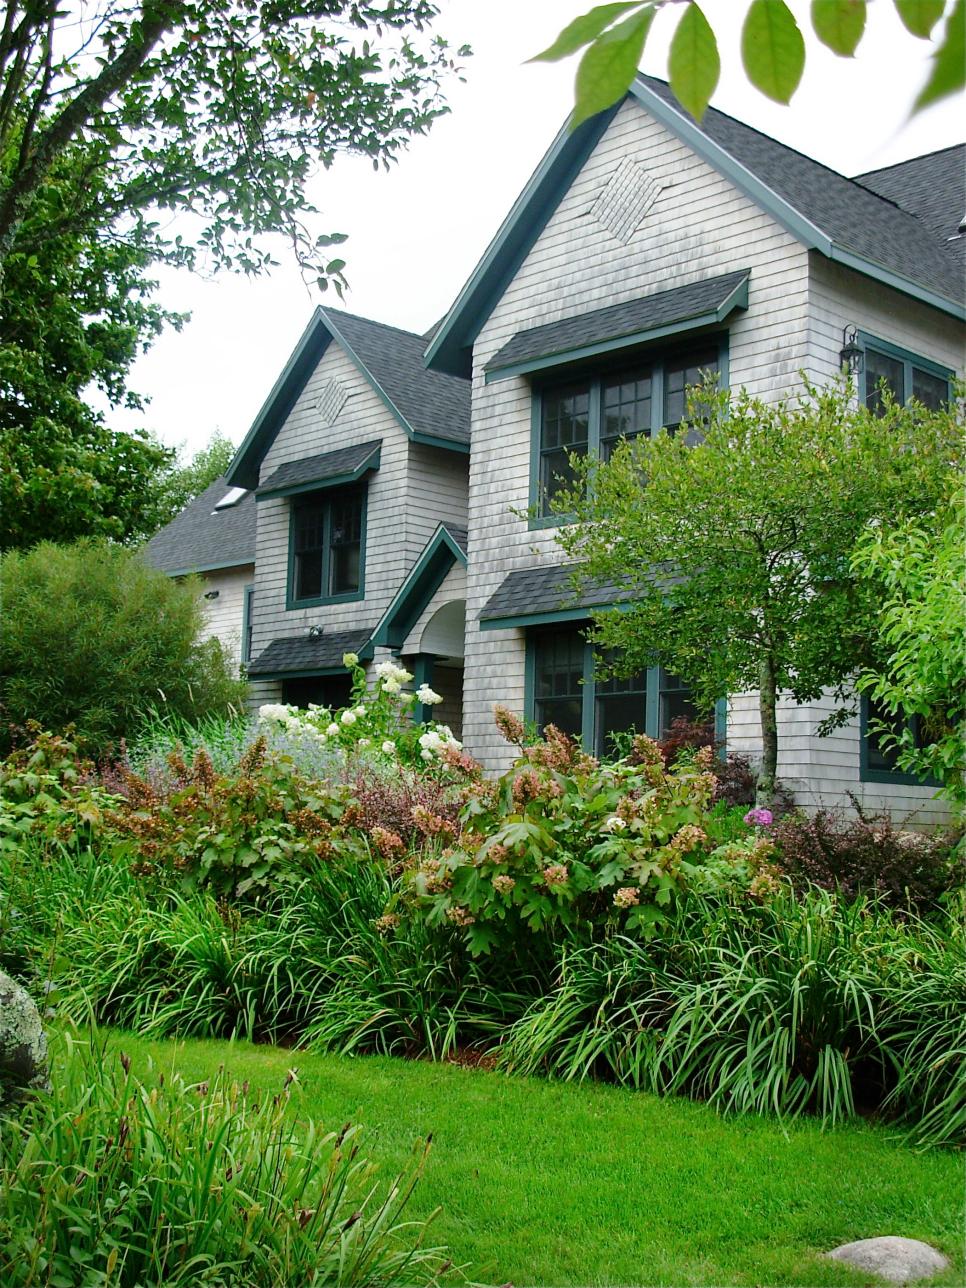 Traditional Home Exterior With Landscaping and Greenery